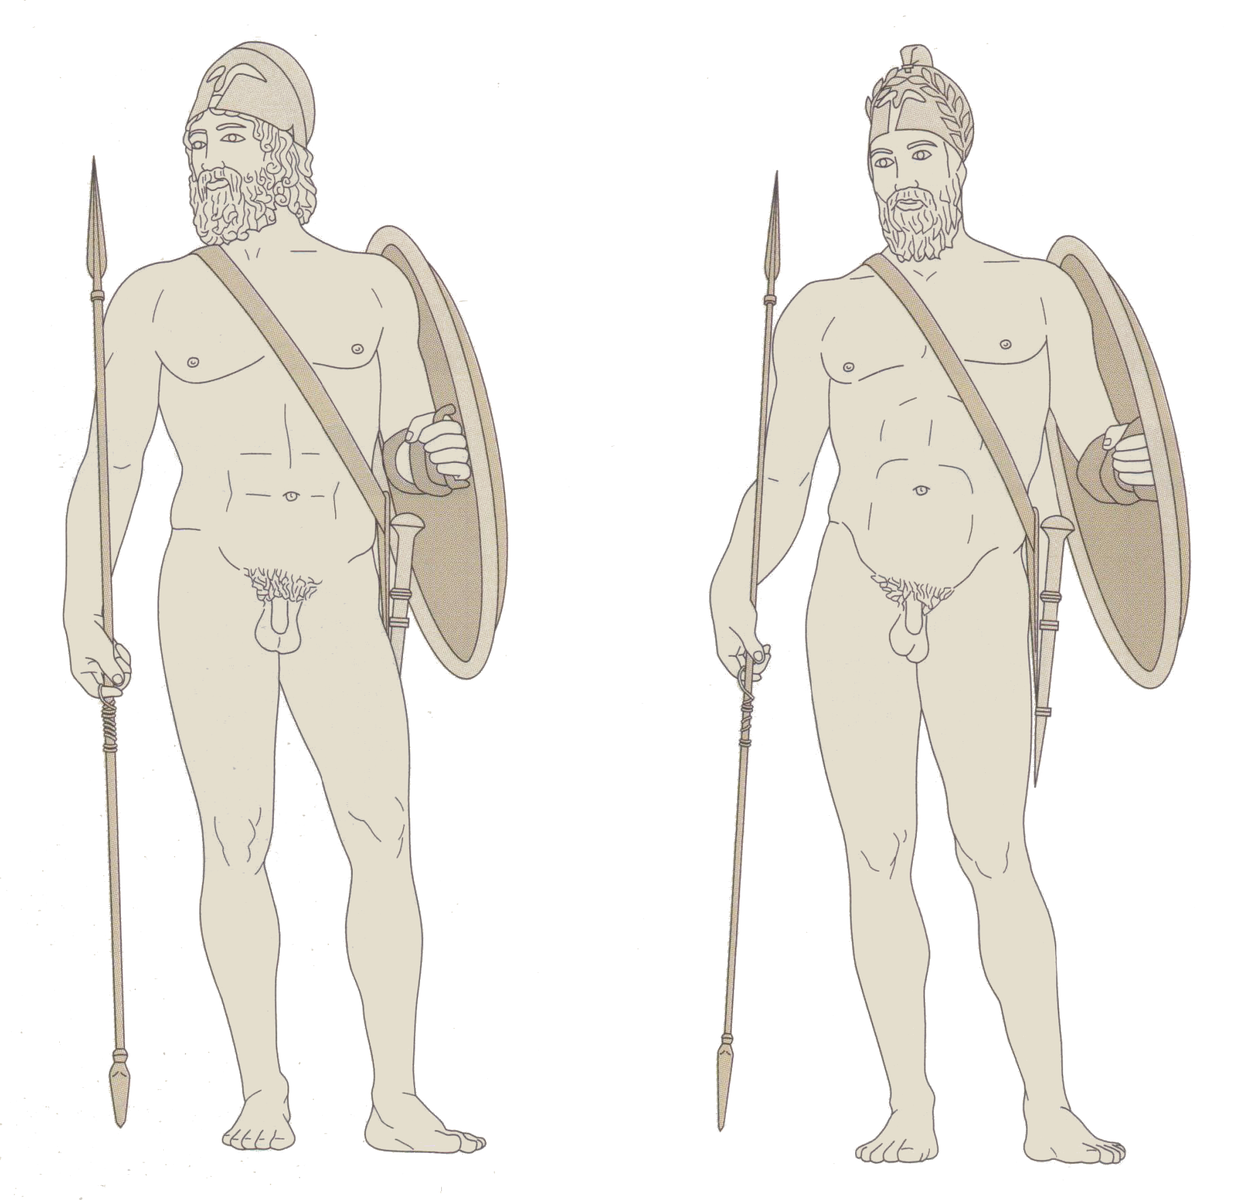 A conjectural restored view of the two warriors (image: Leomonaci121198)